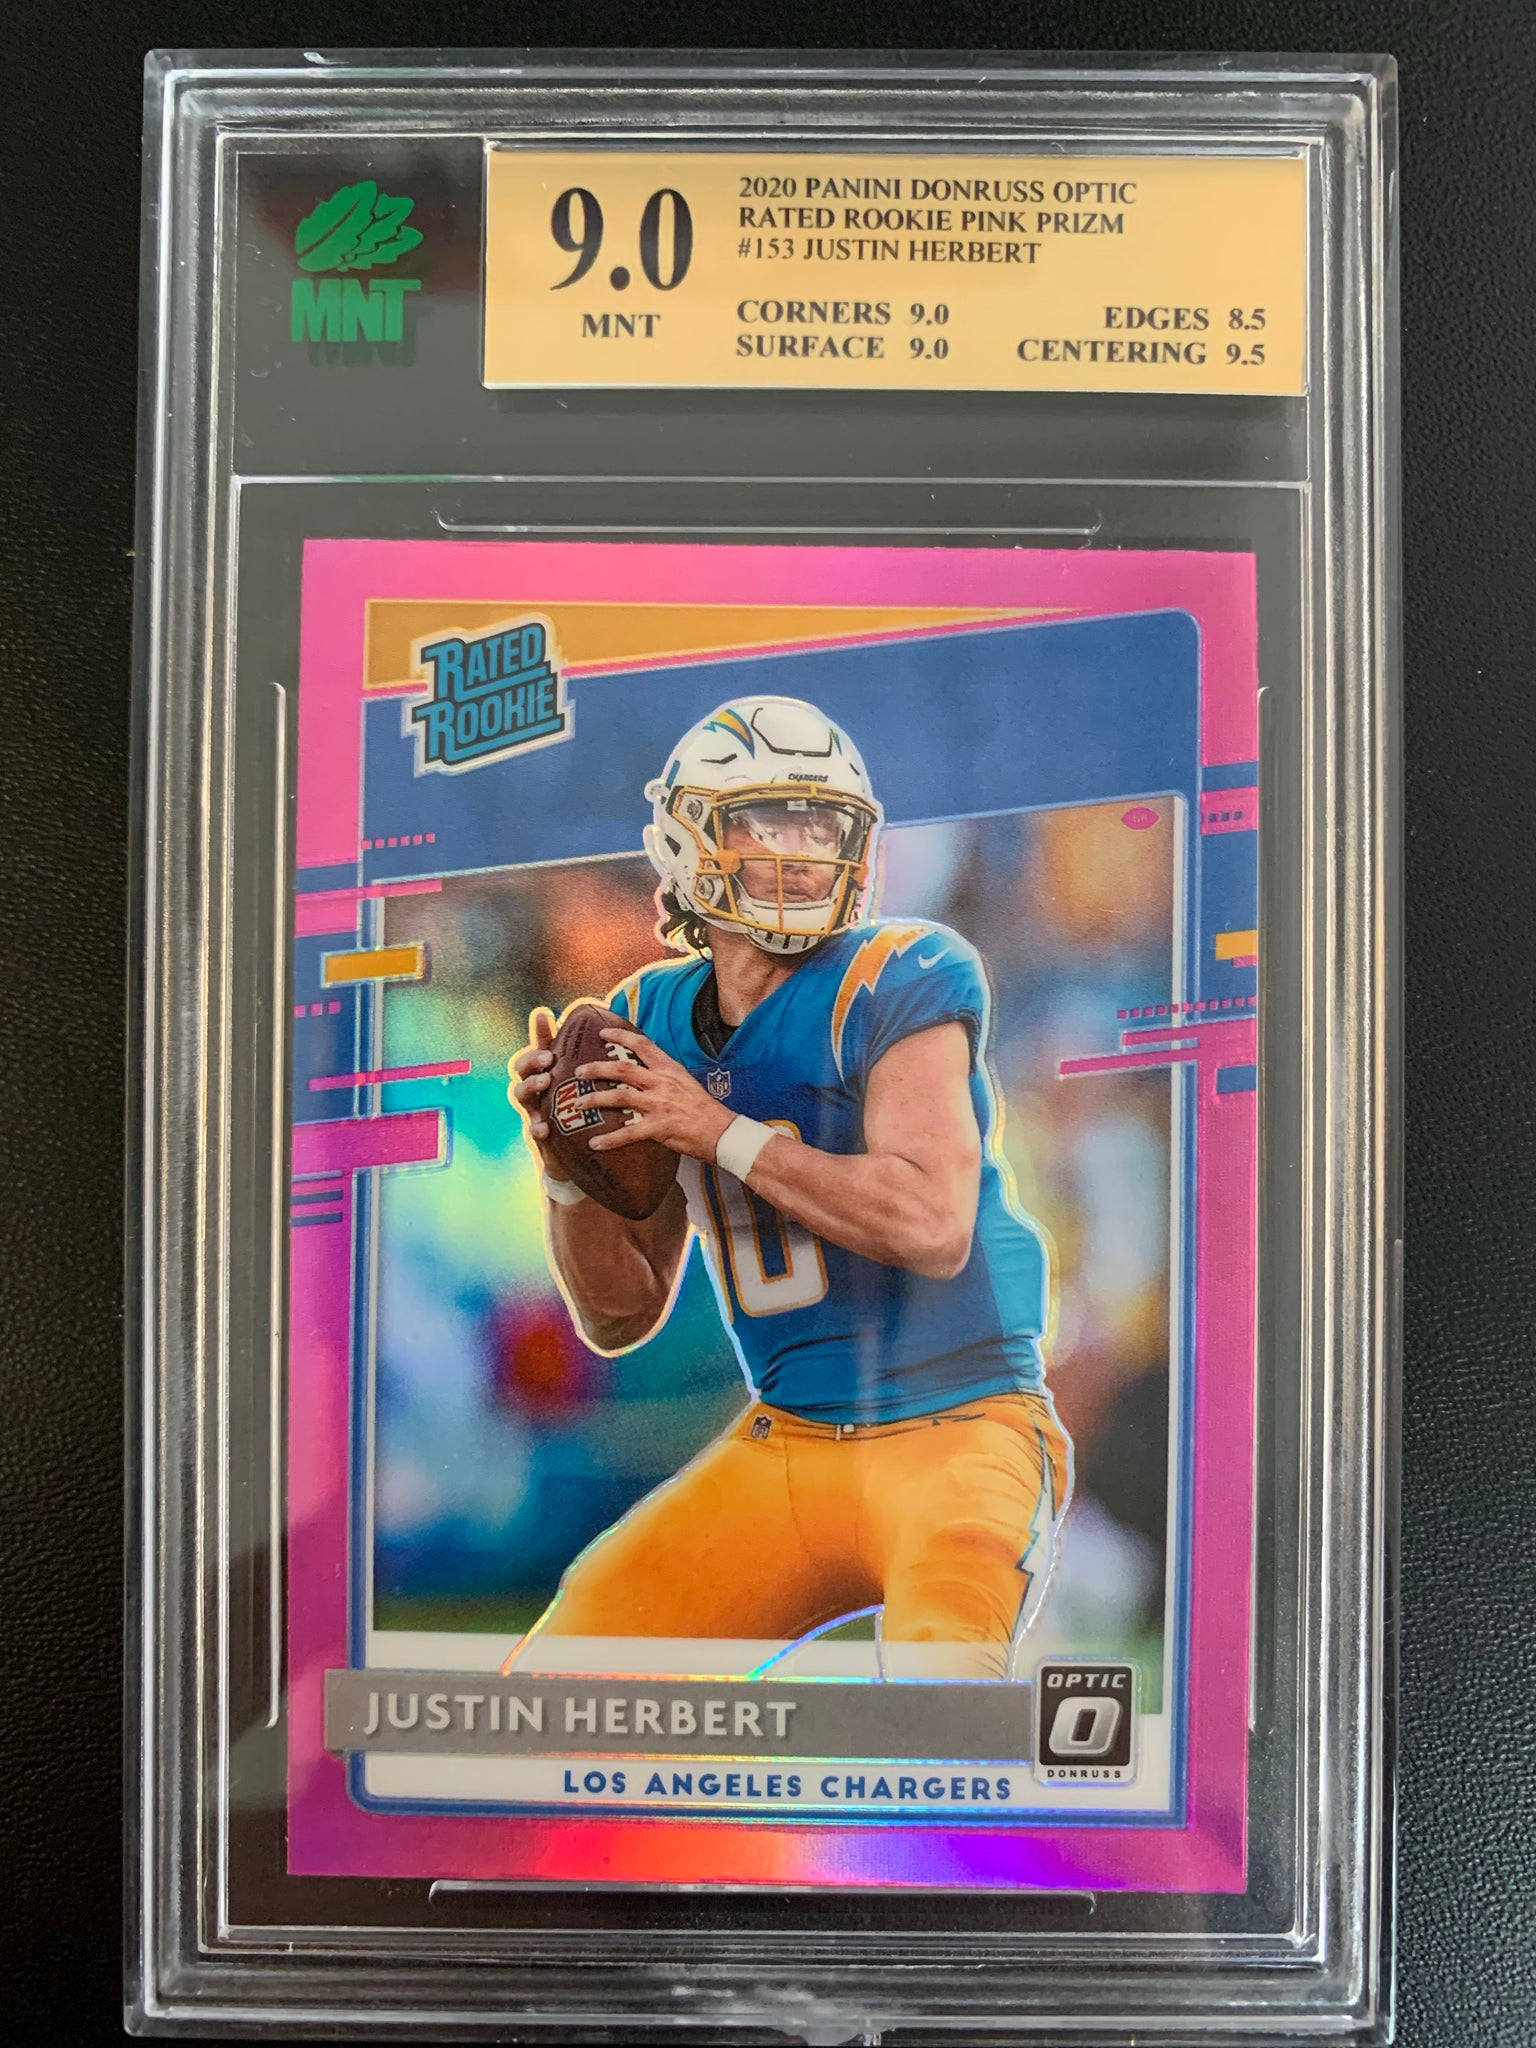 2020 PANINI DONRUSS OPTIC FOOTBALL #153 LOS ANGELES CHARGERS - JUSTIN HERBERT SP PINK PRIZM ROOKIE CARD GRADED MNT 9.0 MINT